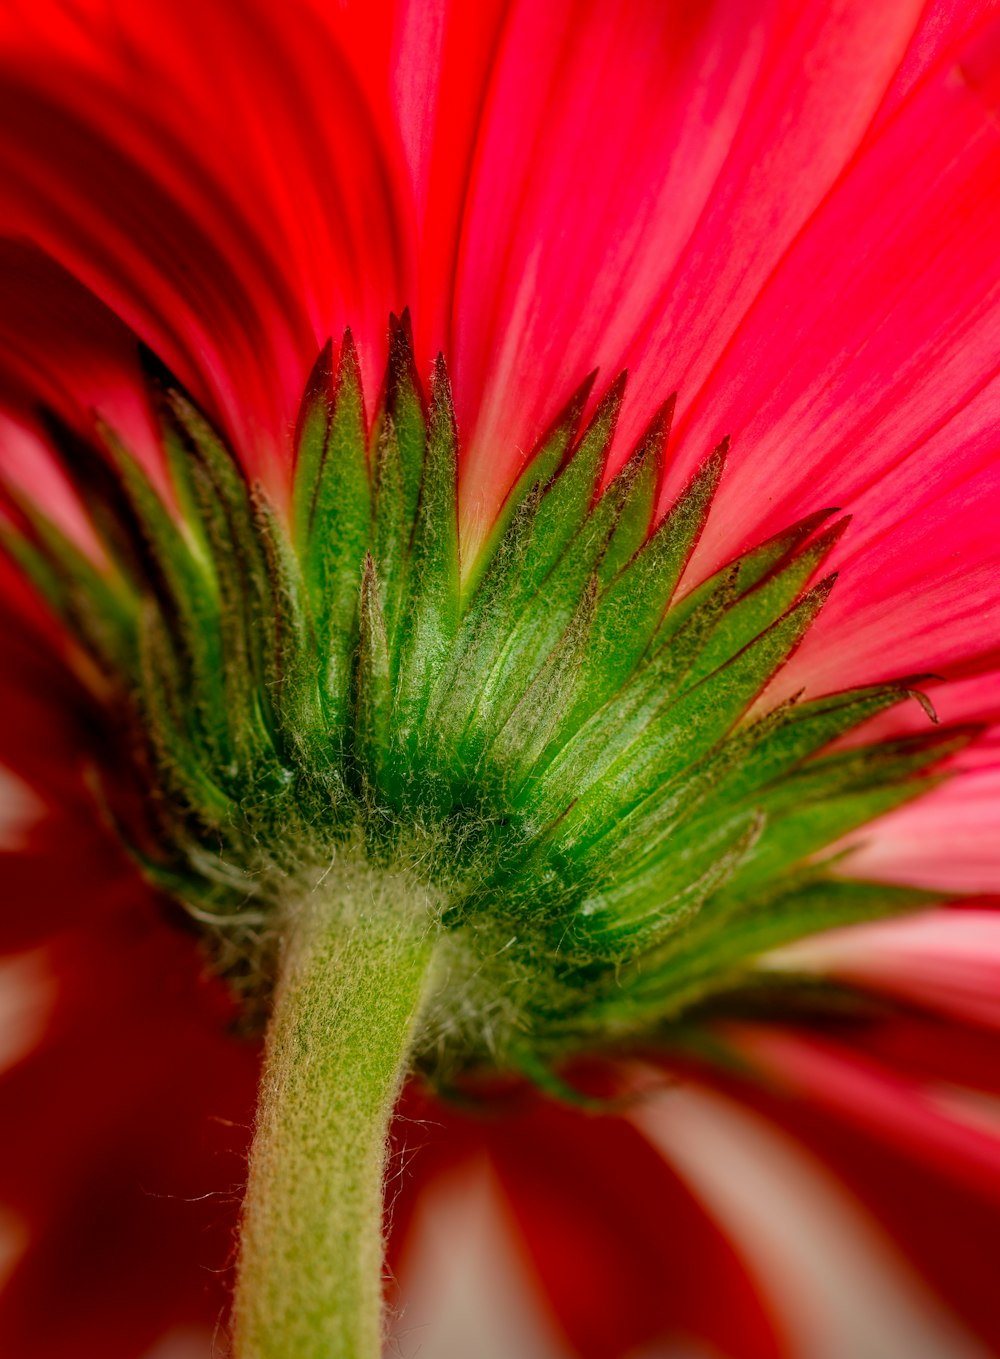 a close up of a pink flower with a green center